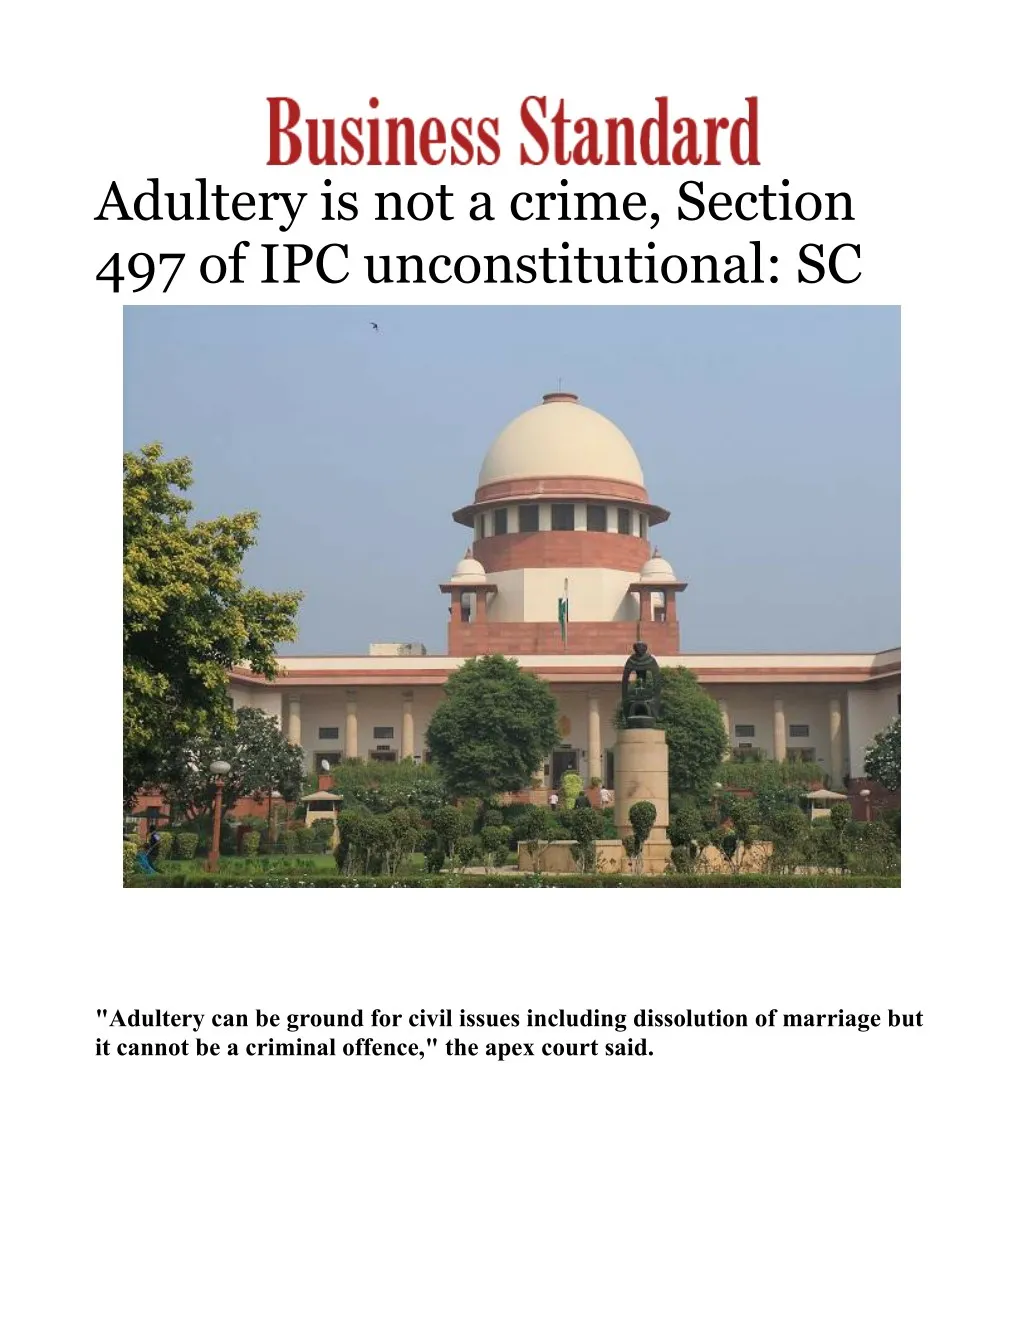 adultery is not a crime section